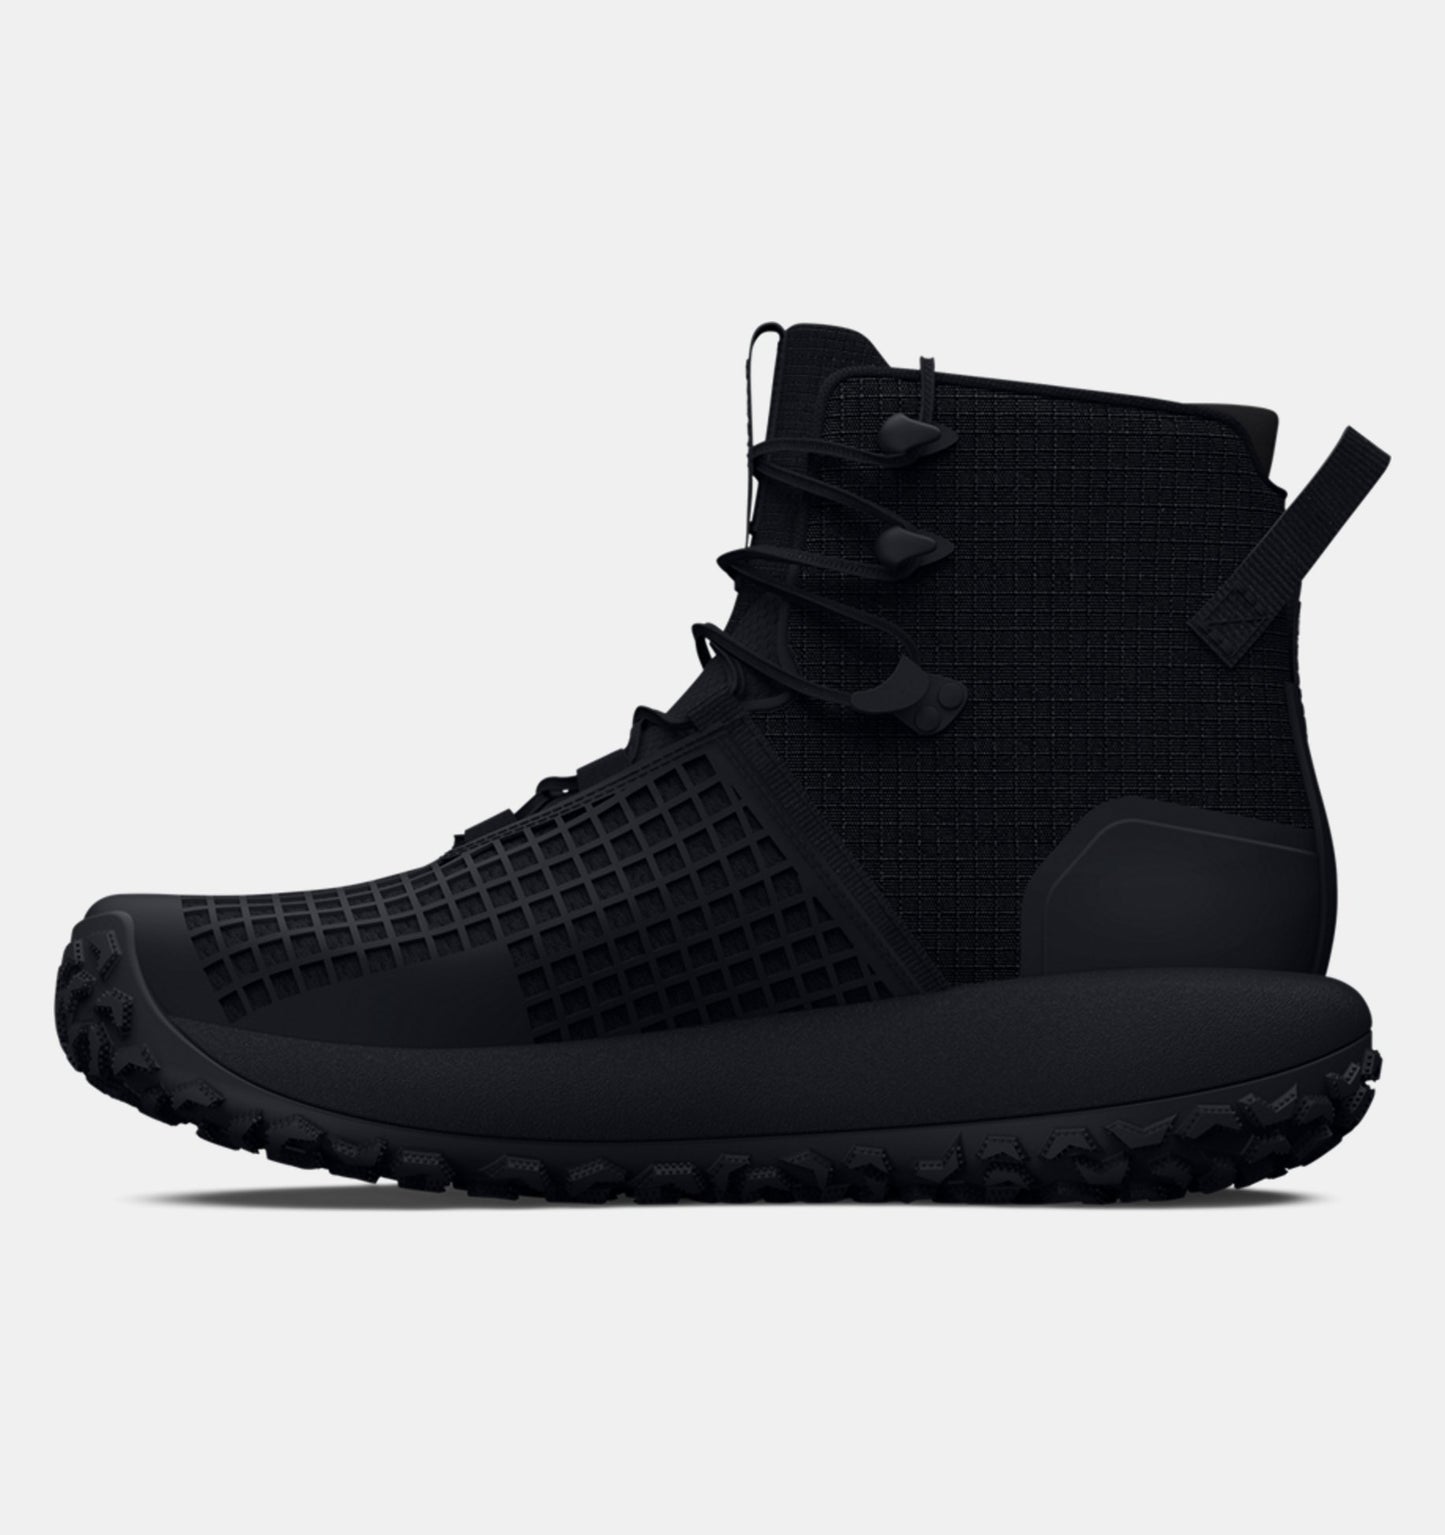 Under Armour HOVR™ Infil Tactical Boots - 3026369-001